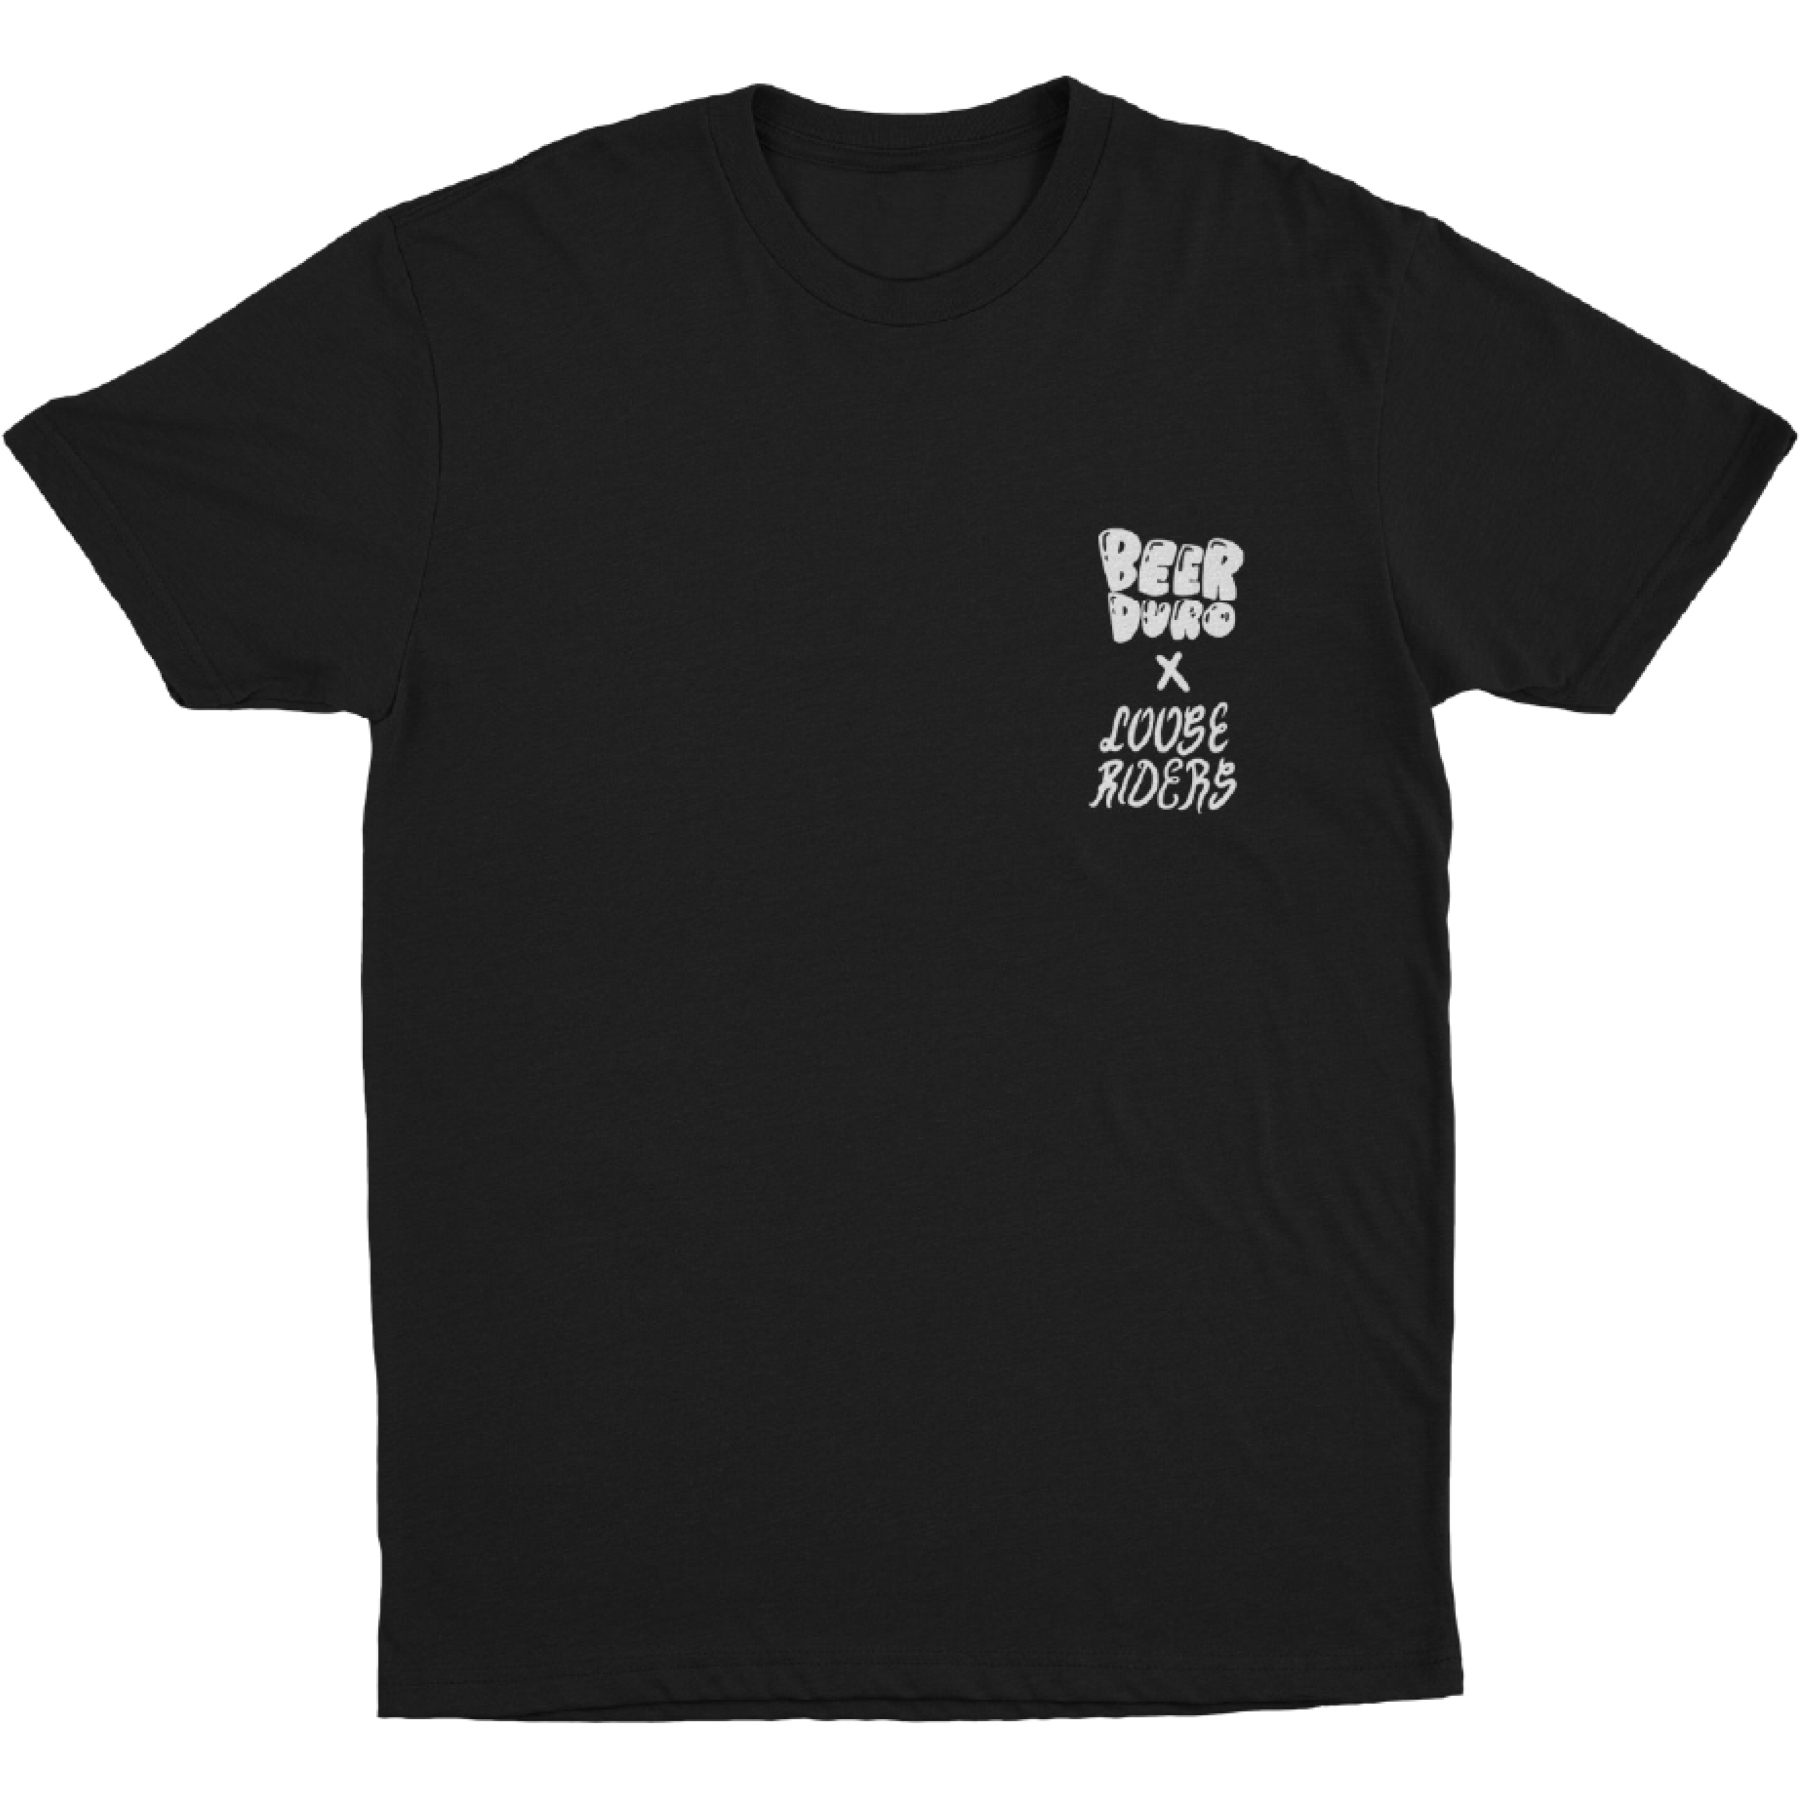 Loose Riders Beerduro Lifestyle T-Shirt - Wasted Crew 02 | BIKE24